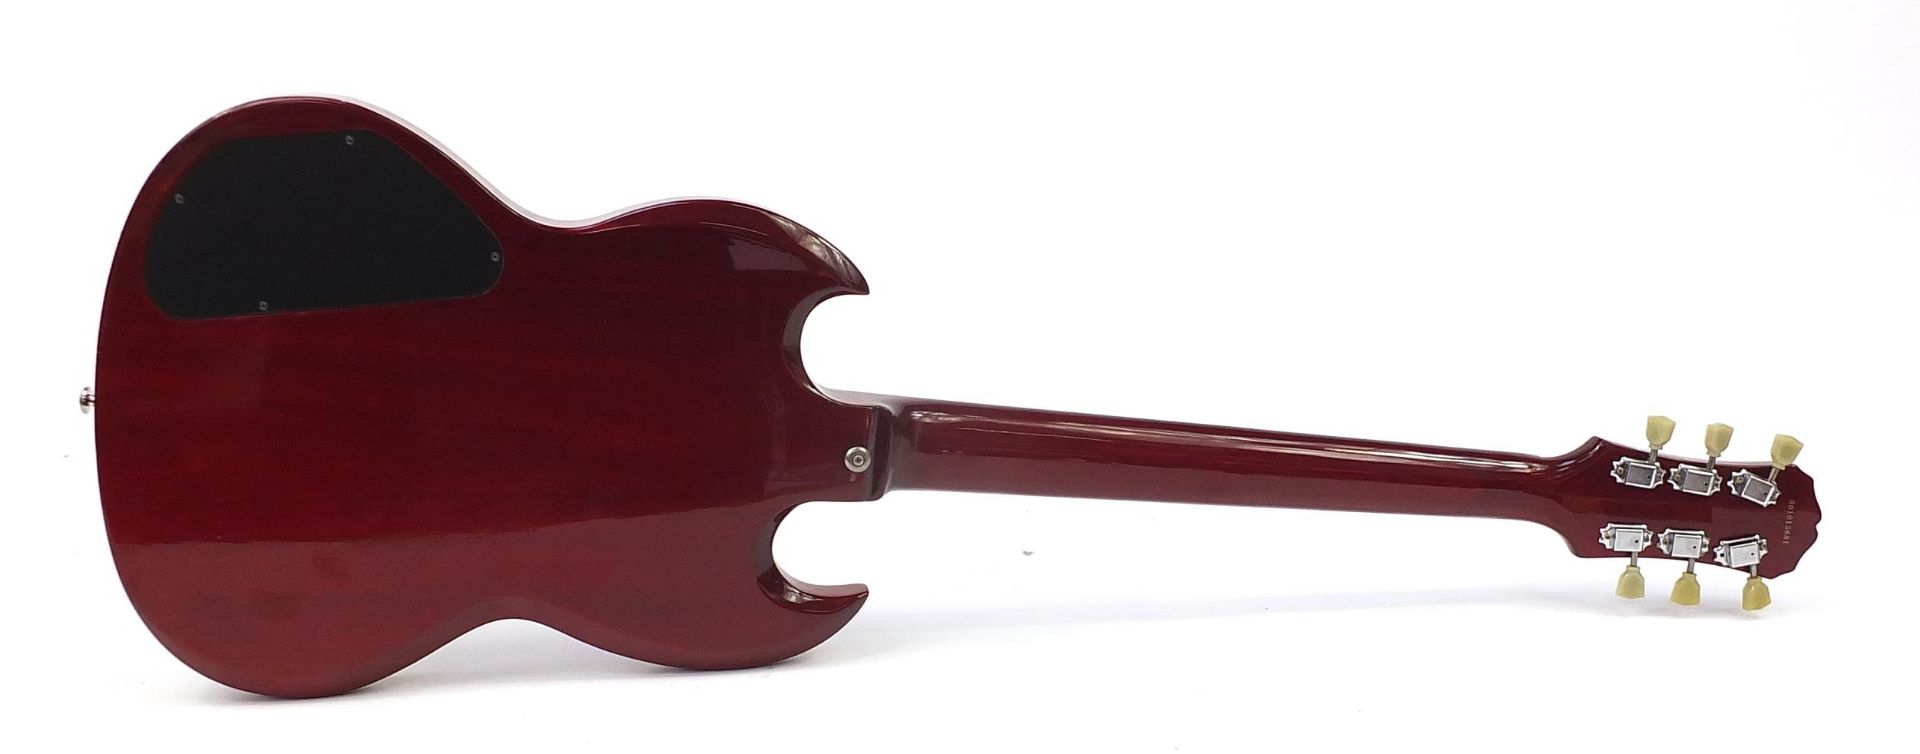 Red lacquered Gibson Epiphone six string electric guitar, serial number S01015681, 100cm in length - Image 6 of 9